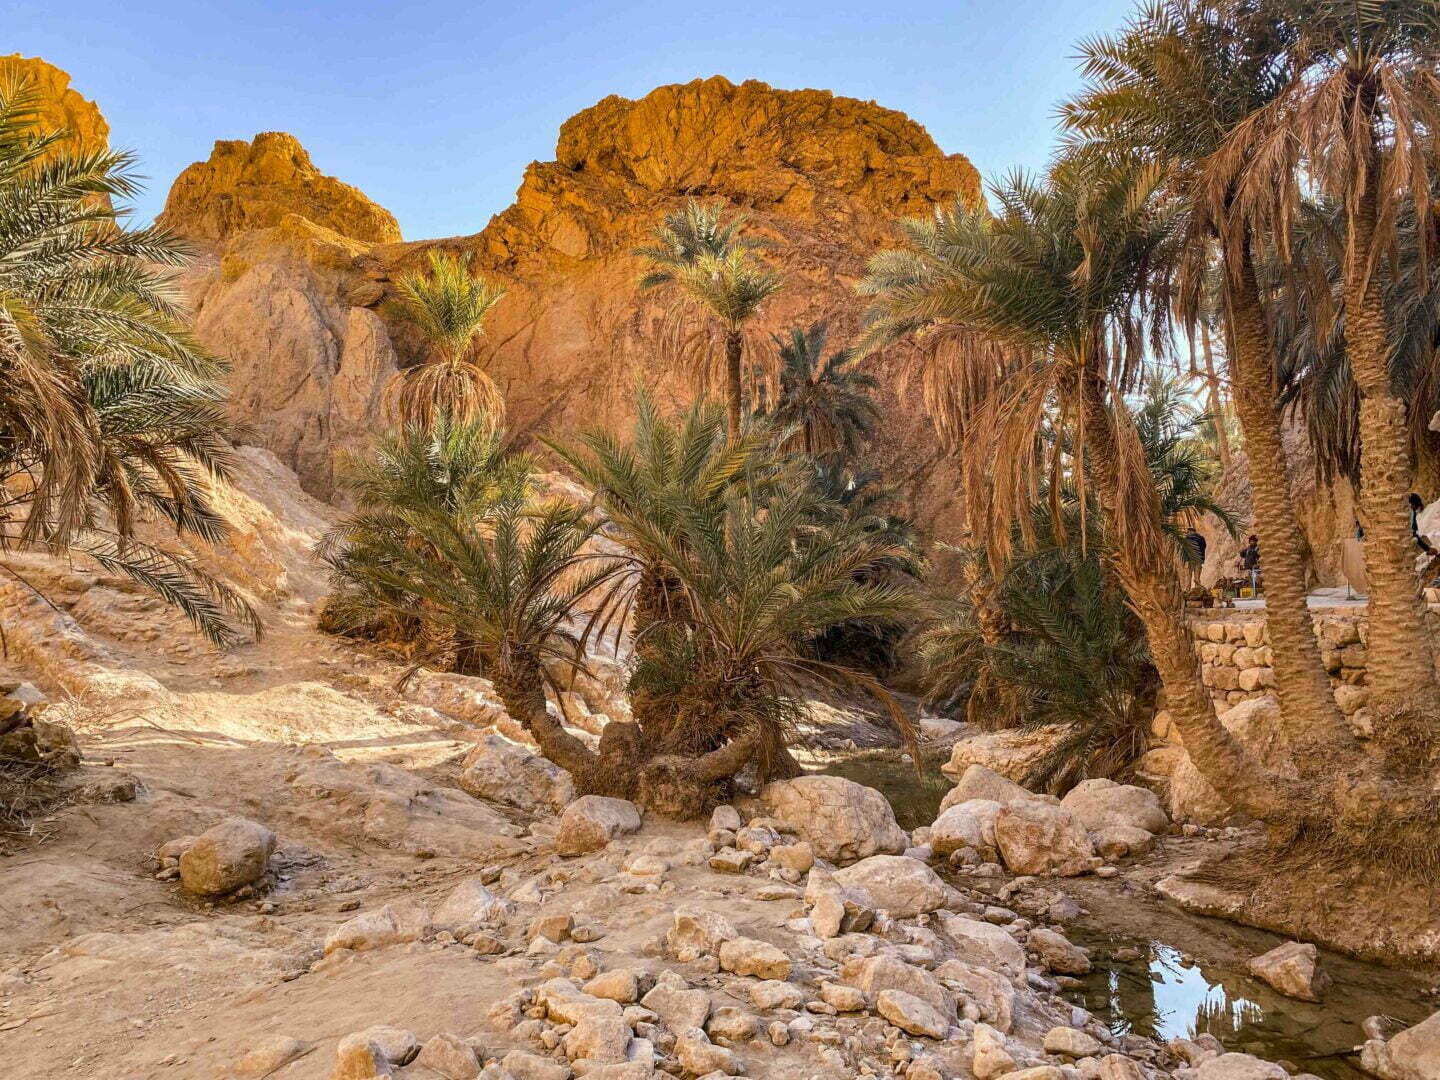 Tunisia - Chebika, the last mountain oasis before we head for the mountains